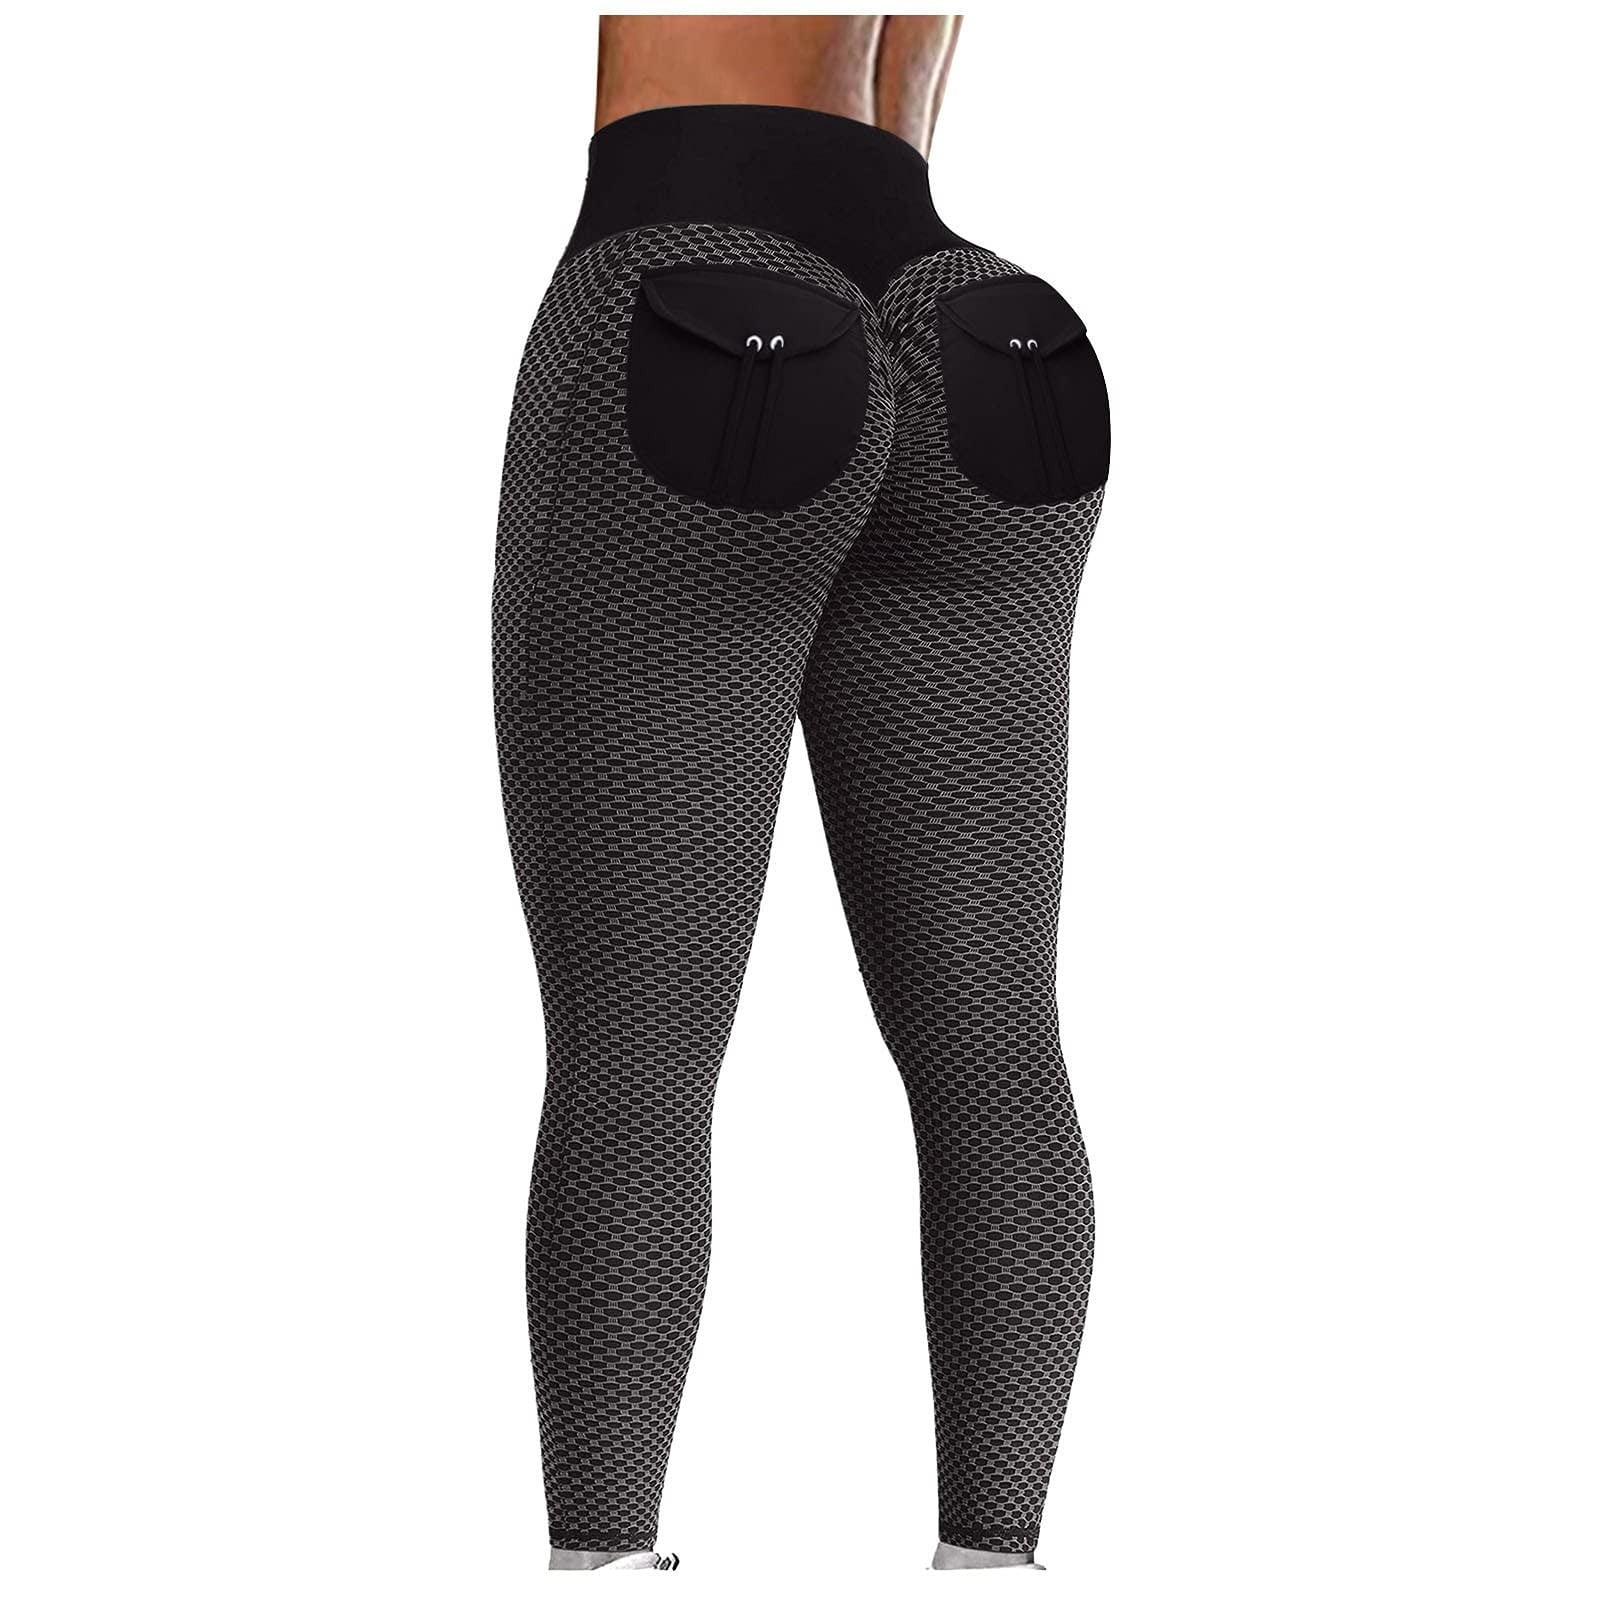 RQYYD Clearance Leggings for Women Butt Lifting Leggings Workout